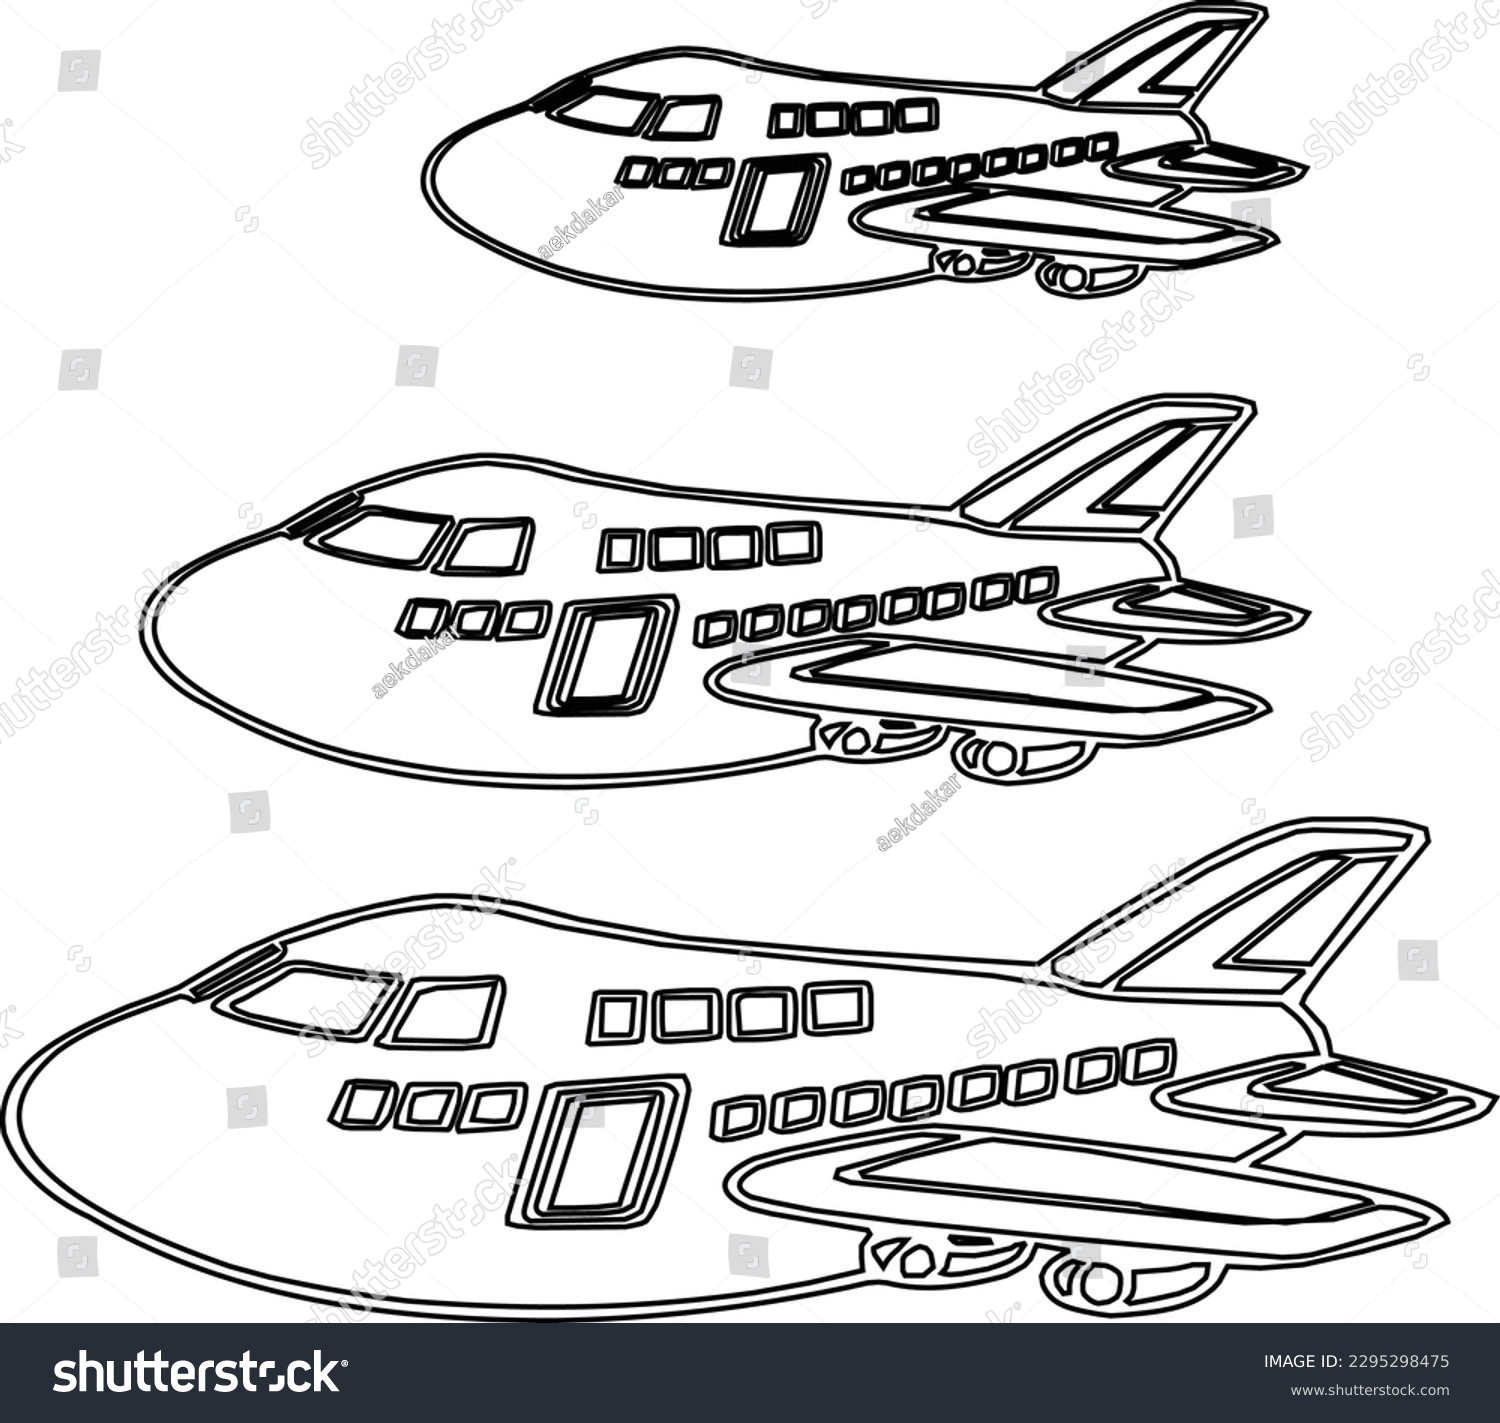 SVG of Aircraft Boeing 747 Vector isolated on white background svg